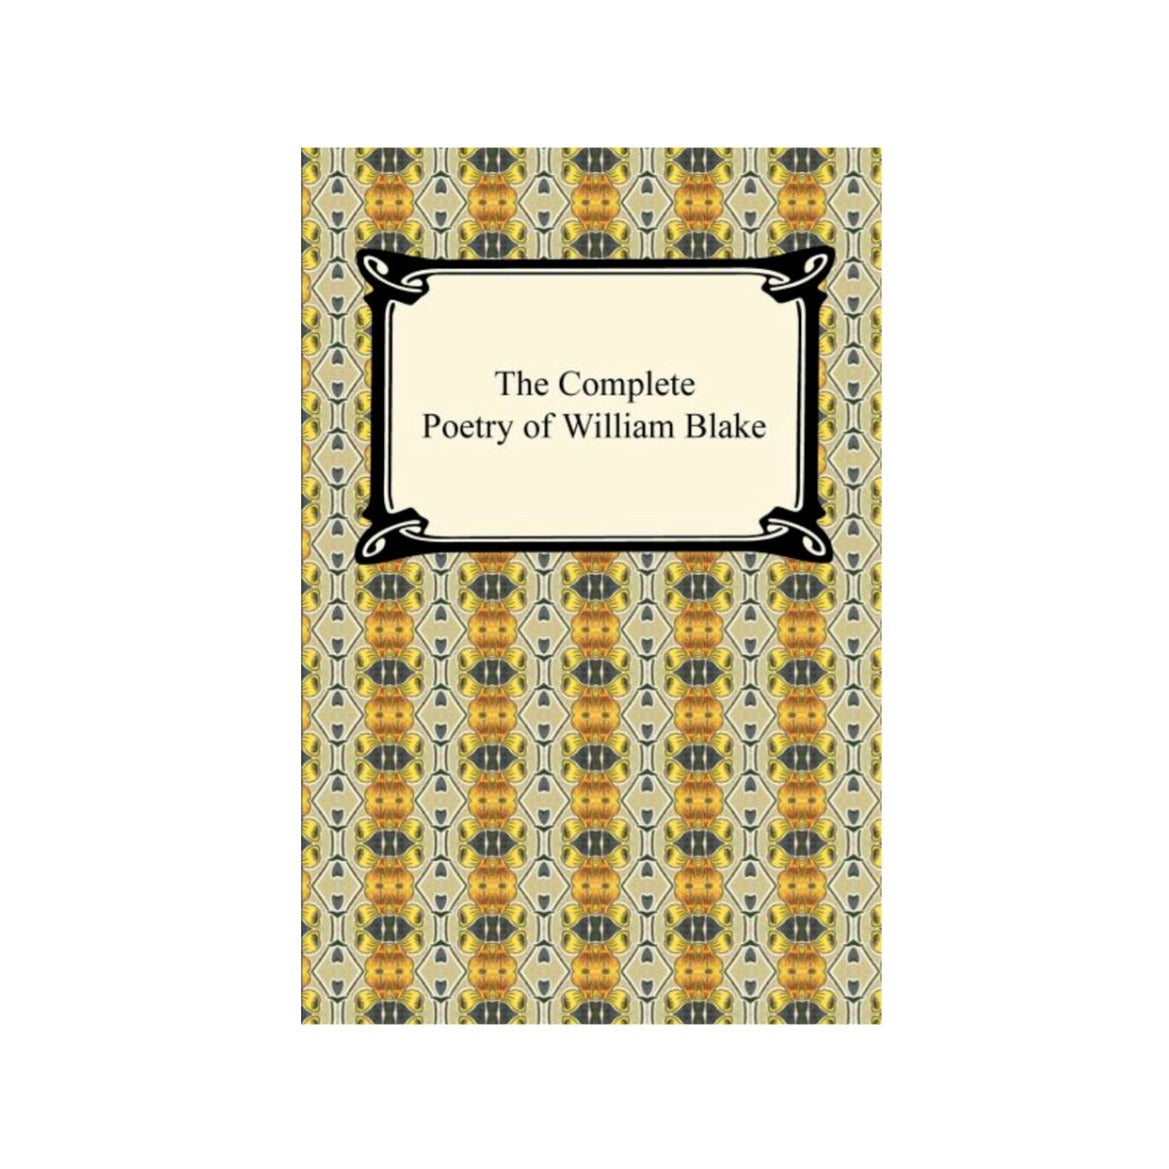 The Complete Poetry of William Blake by William Blake